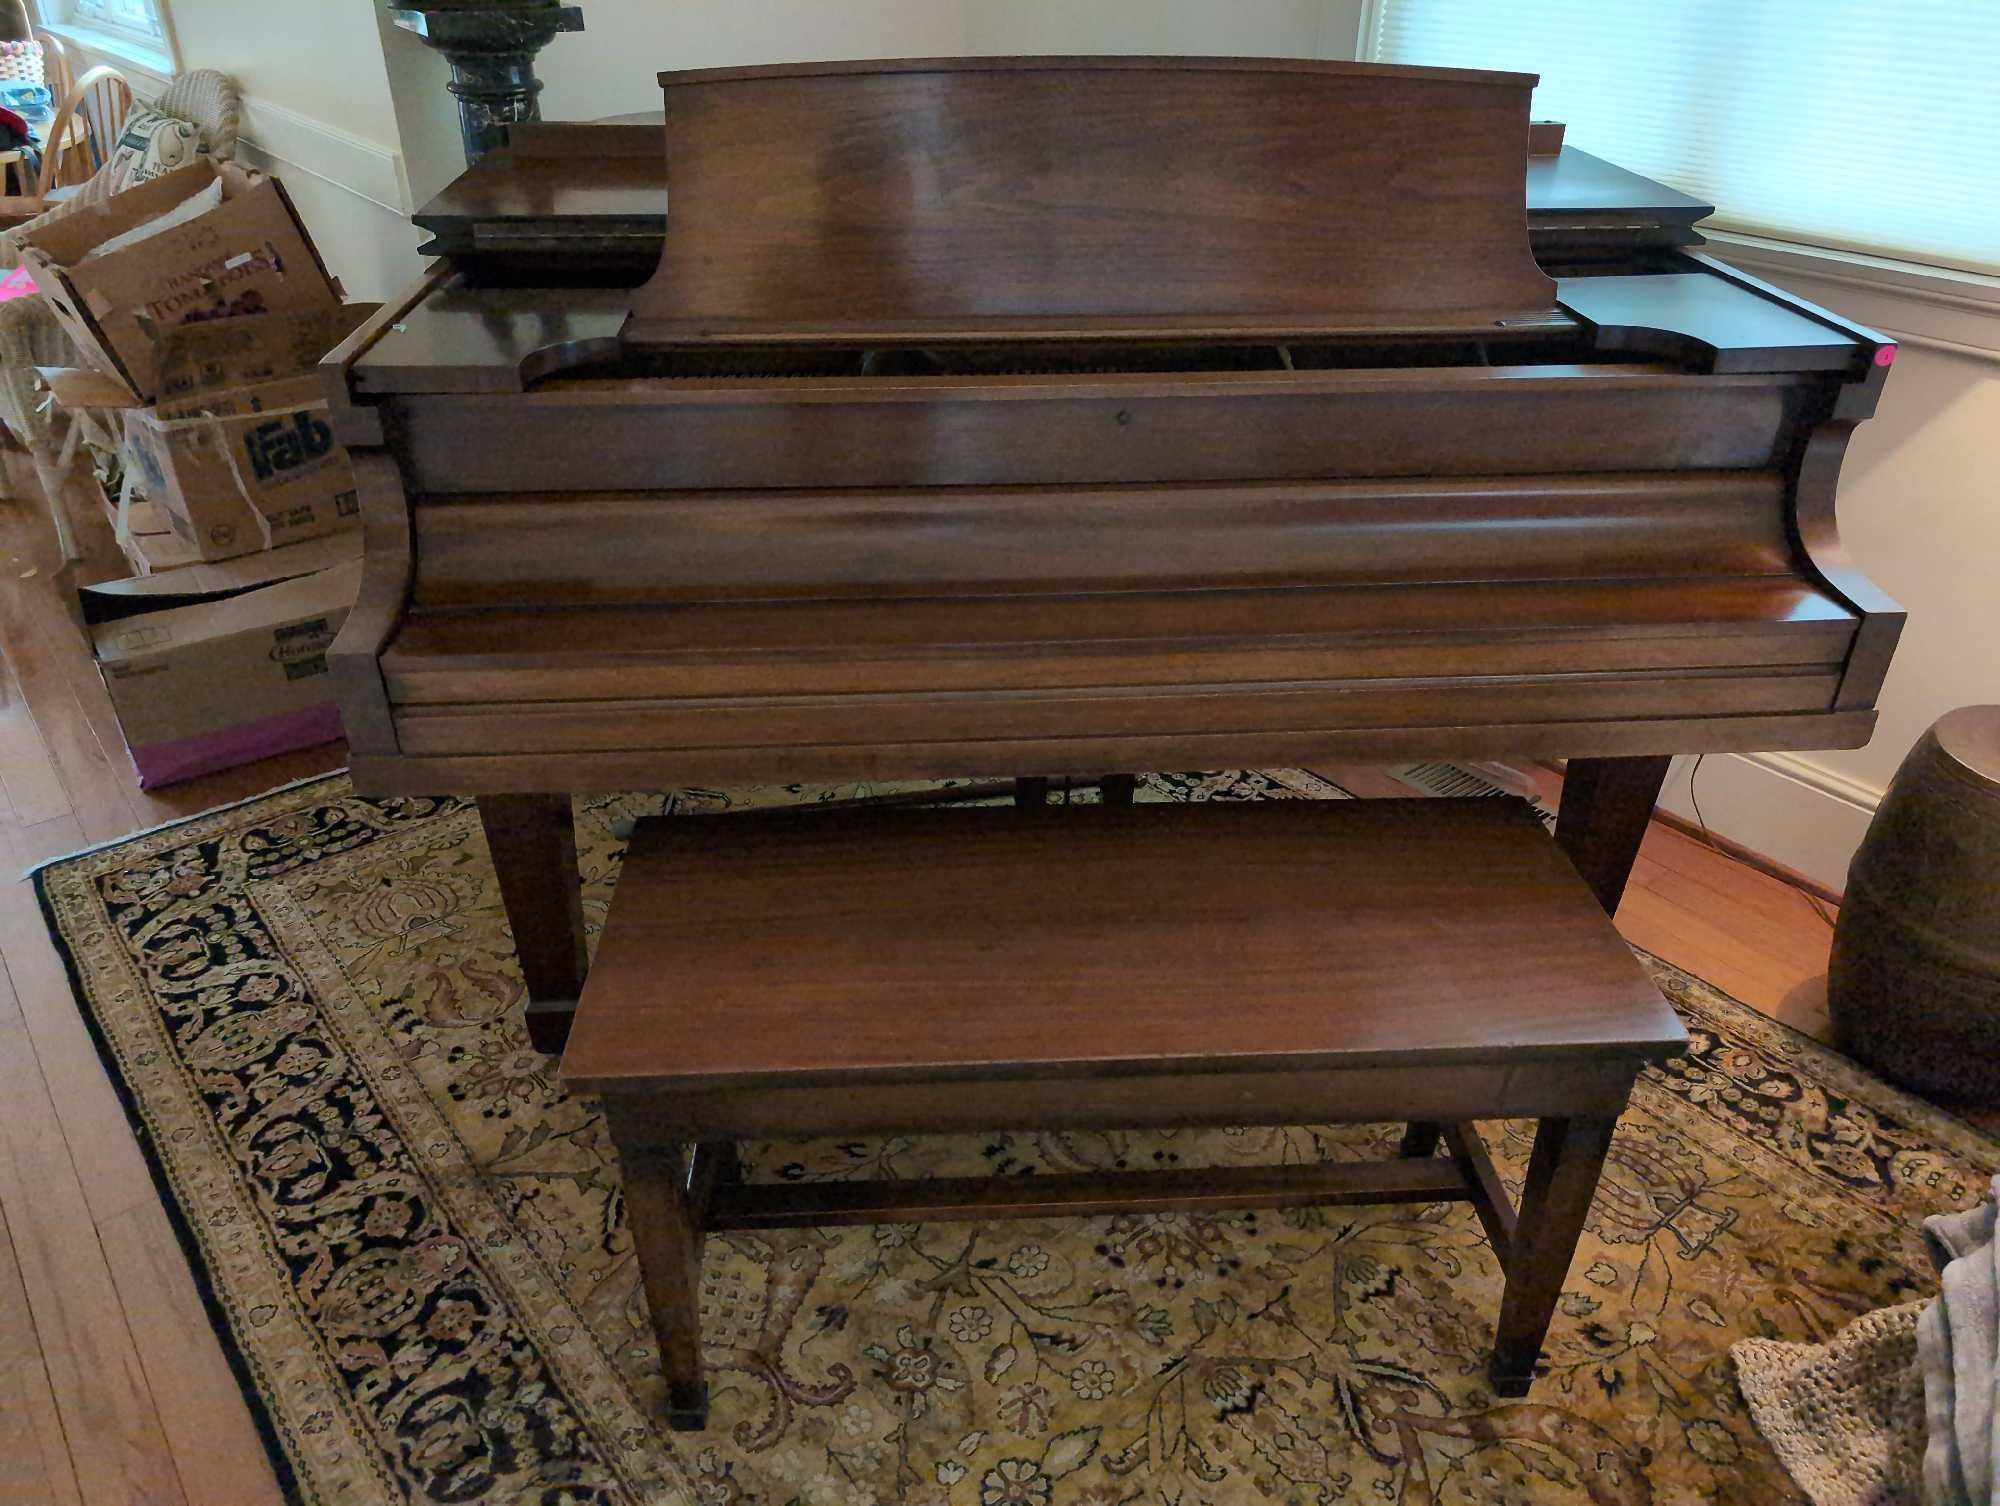 (MIDBKH) WELTE BABY GRAND PIANO & PIANO BENCH, MODEL #71760. APPEARS TO BE IN GOOD USED CONDITION,